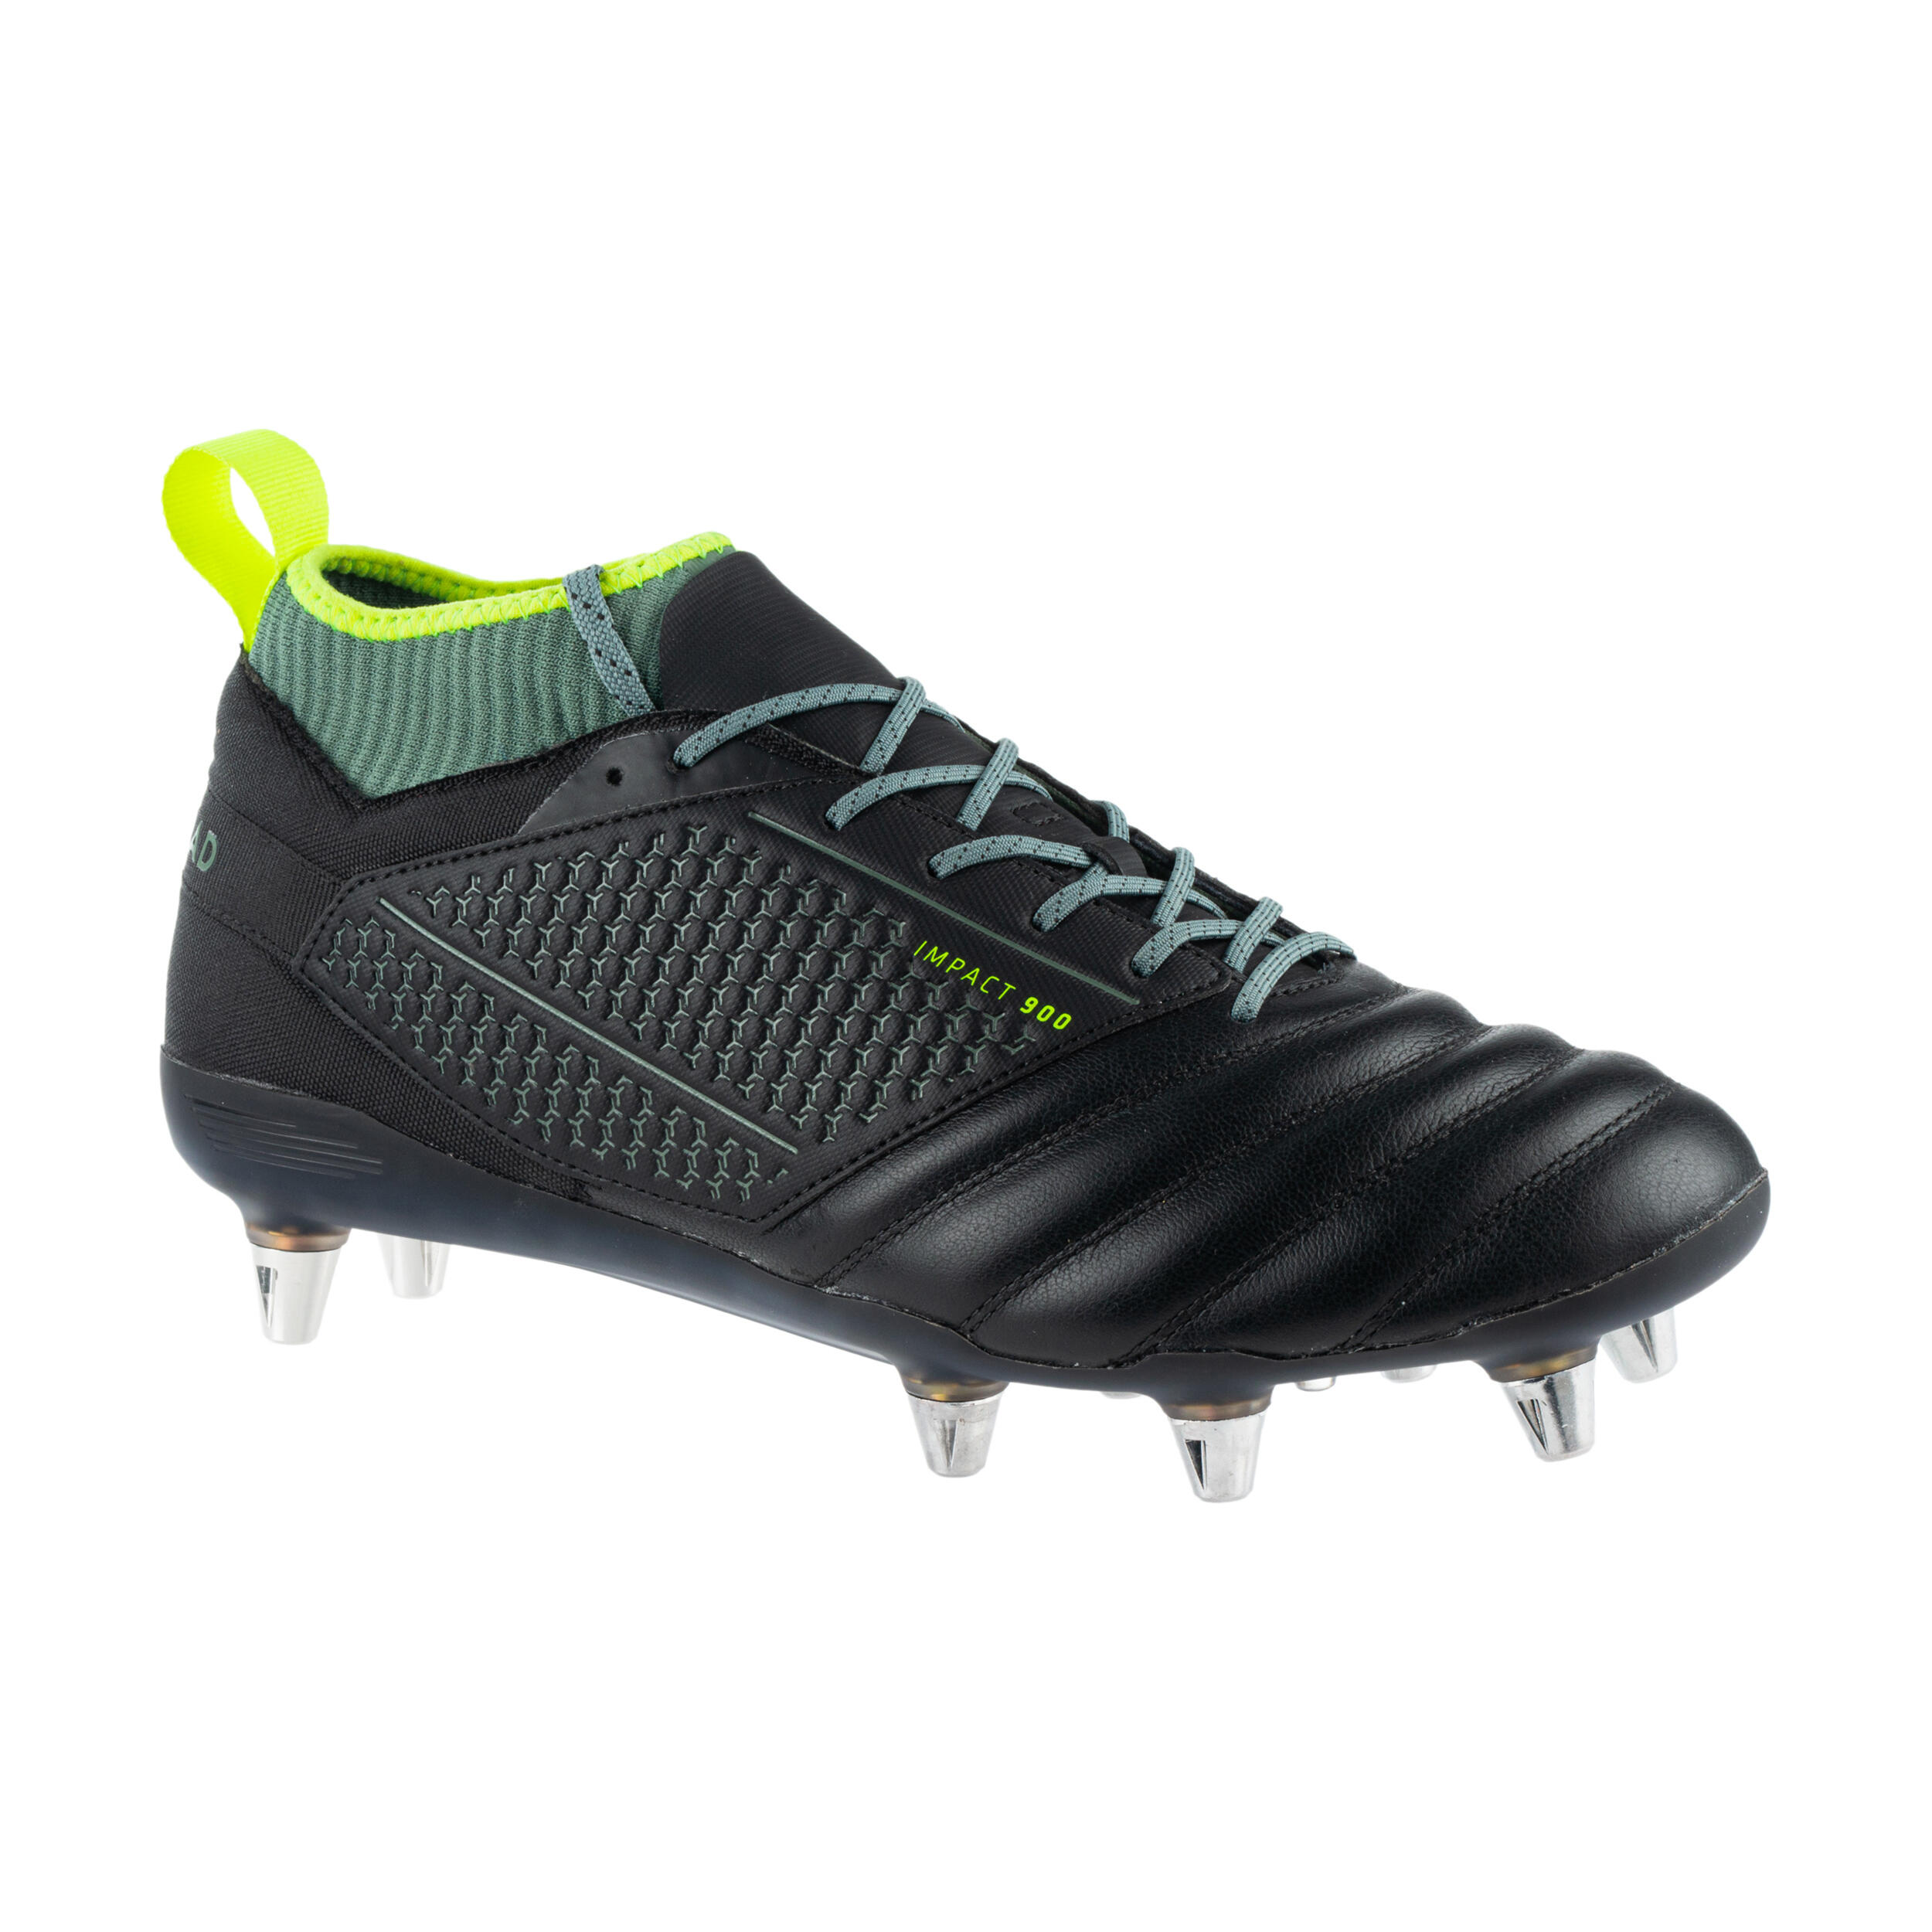 Rugby Boots Impact R900 SG 8 Studs 